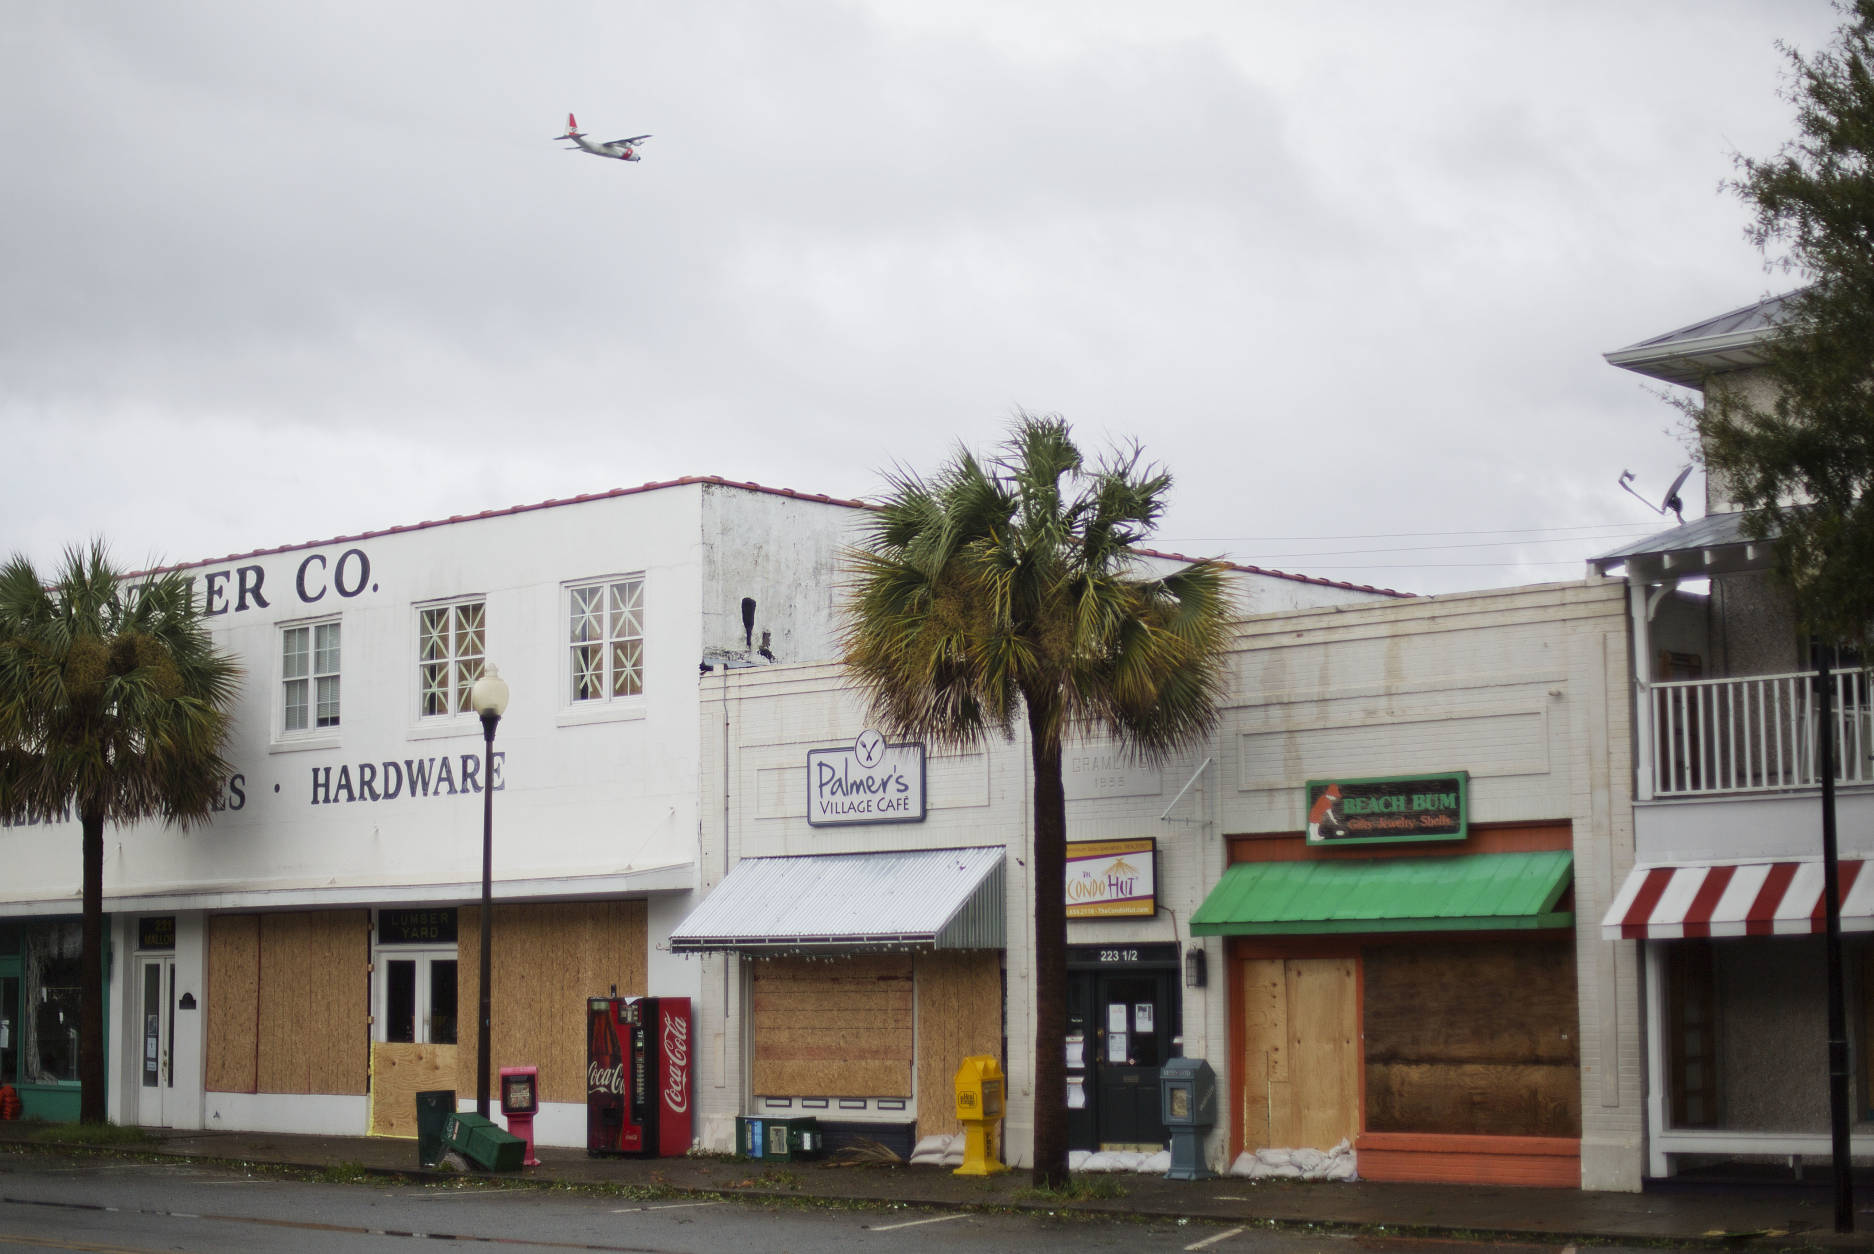 A U.S. Coast Guard plane flies over boarded up shops after Hurricane Matthew passed through St. Simons Island, Ga., Saturday, Oct. 8, 2016. A weakening Hurricane Matthew continued its march along the Atlantic coast Saturday, lashing two of the South's most historic cities and some of its most popular resort islands, flattening trees, swamping streets and knocking out power to hundreds of thousands. (AP Photo/David Goldman)